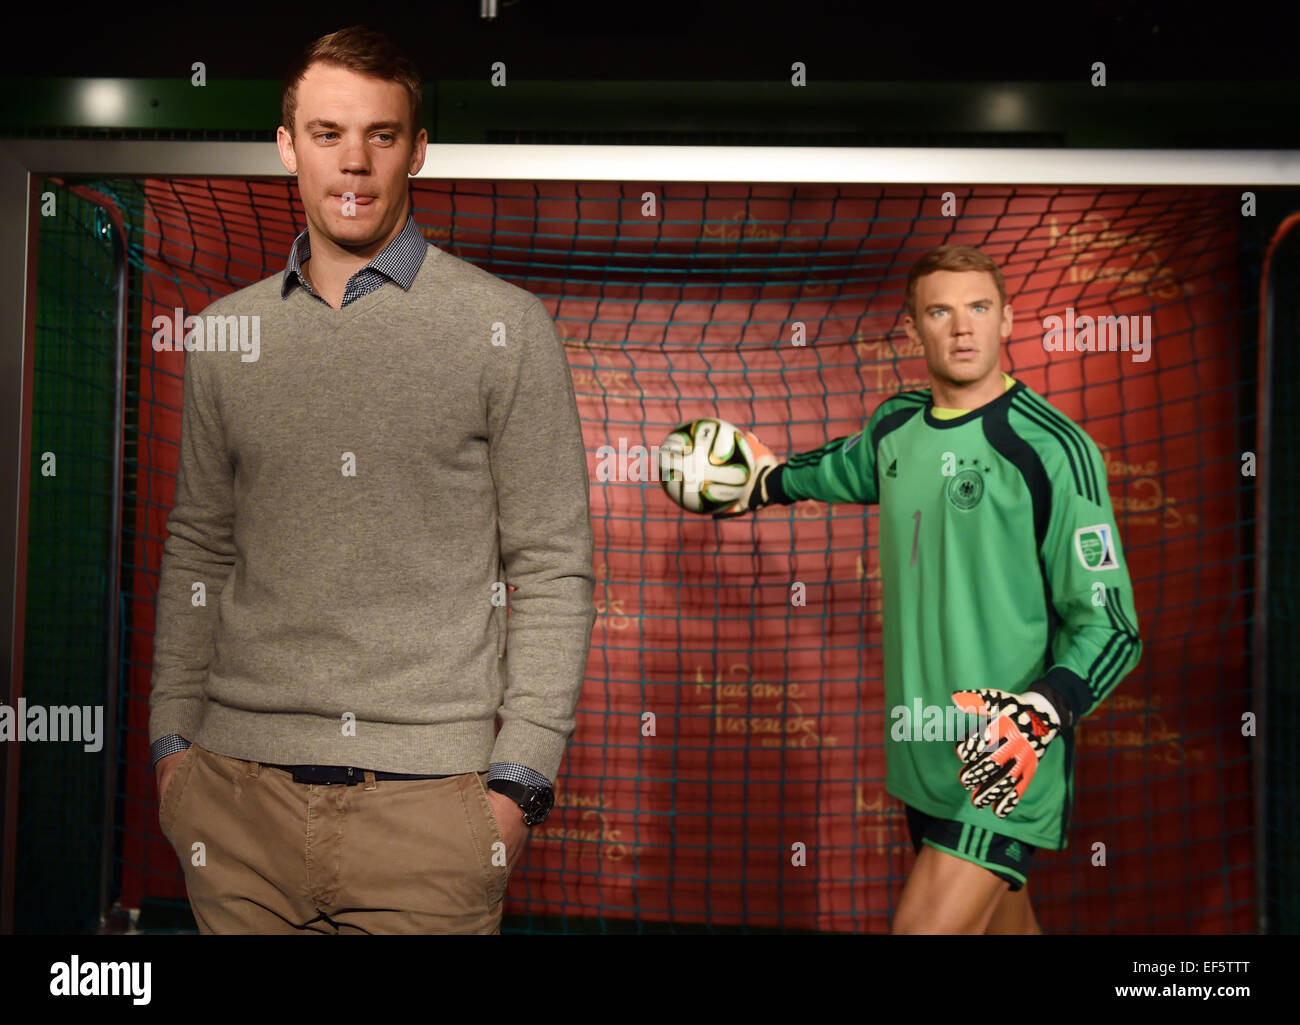 Berlin, Germany. 26th January, 2015. Manuel Neuer, goalkeeper for the national soccer team, poses next to his wax figure at Madame Tussauds in Berlin, Germany, 26 January 2015. It cost 200,000 Euros to make the figure, which can be seen in the sport section of the wax museum starting Tuesday, 27 January 2015. Photo: JENS KALAENE/dpa/ Alamy Live News Stock Photo